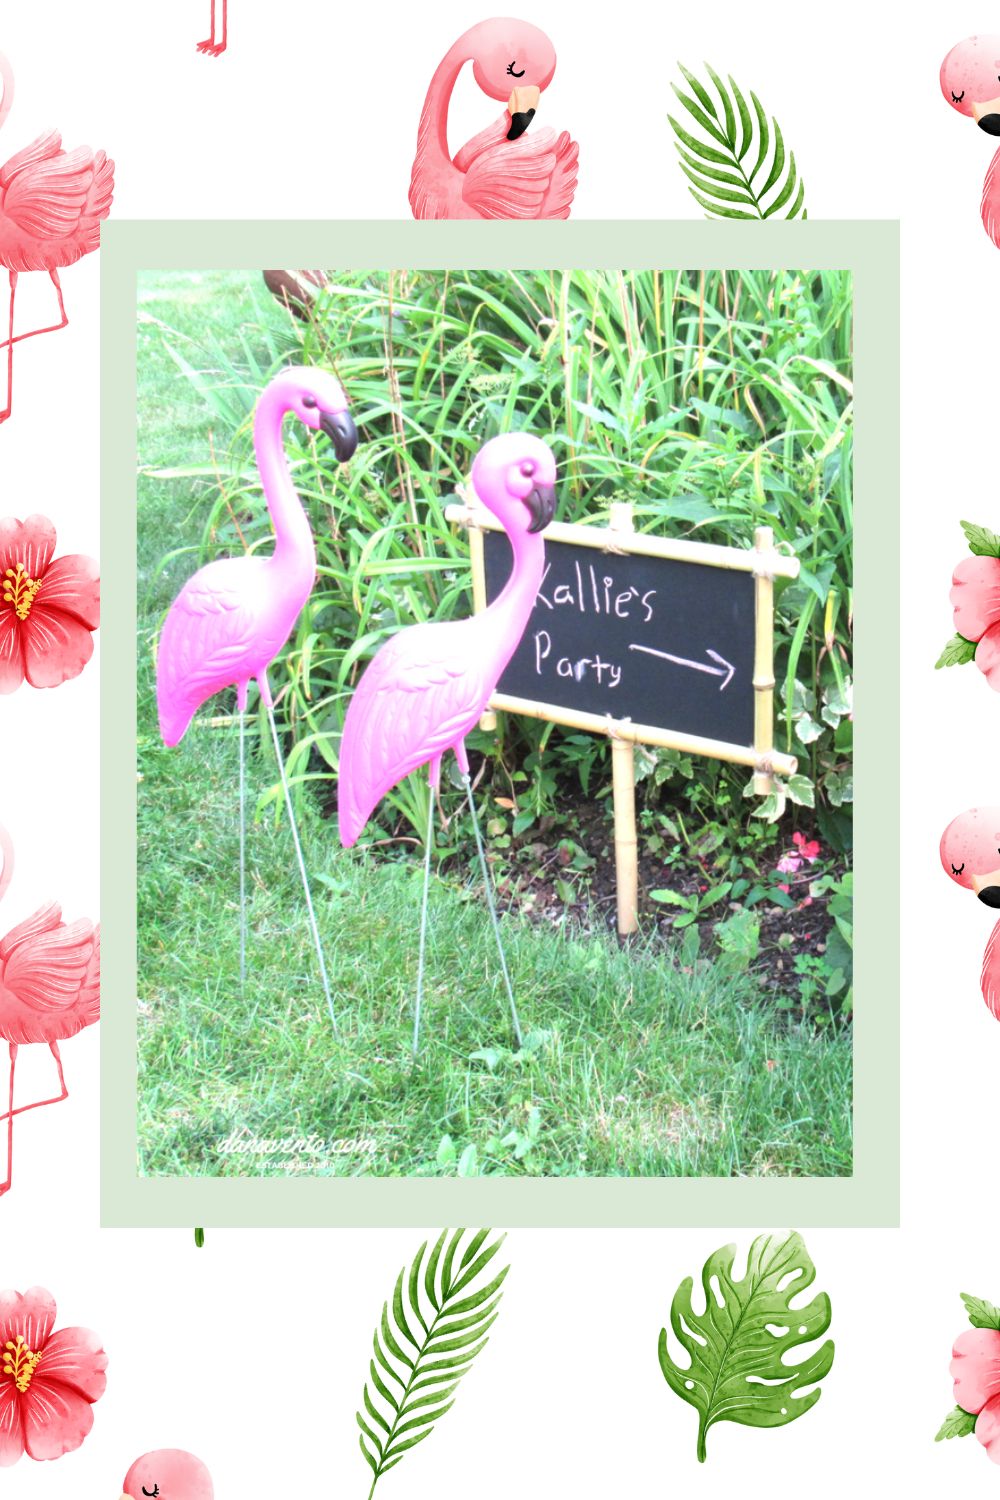 How To Throw A Pink Flamingo Themed Party Using Flamingos to lead the way 